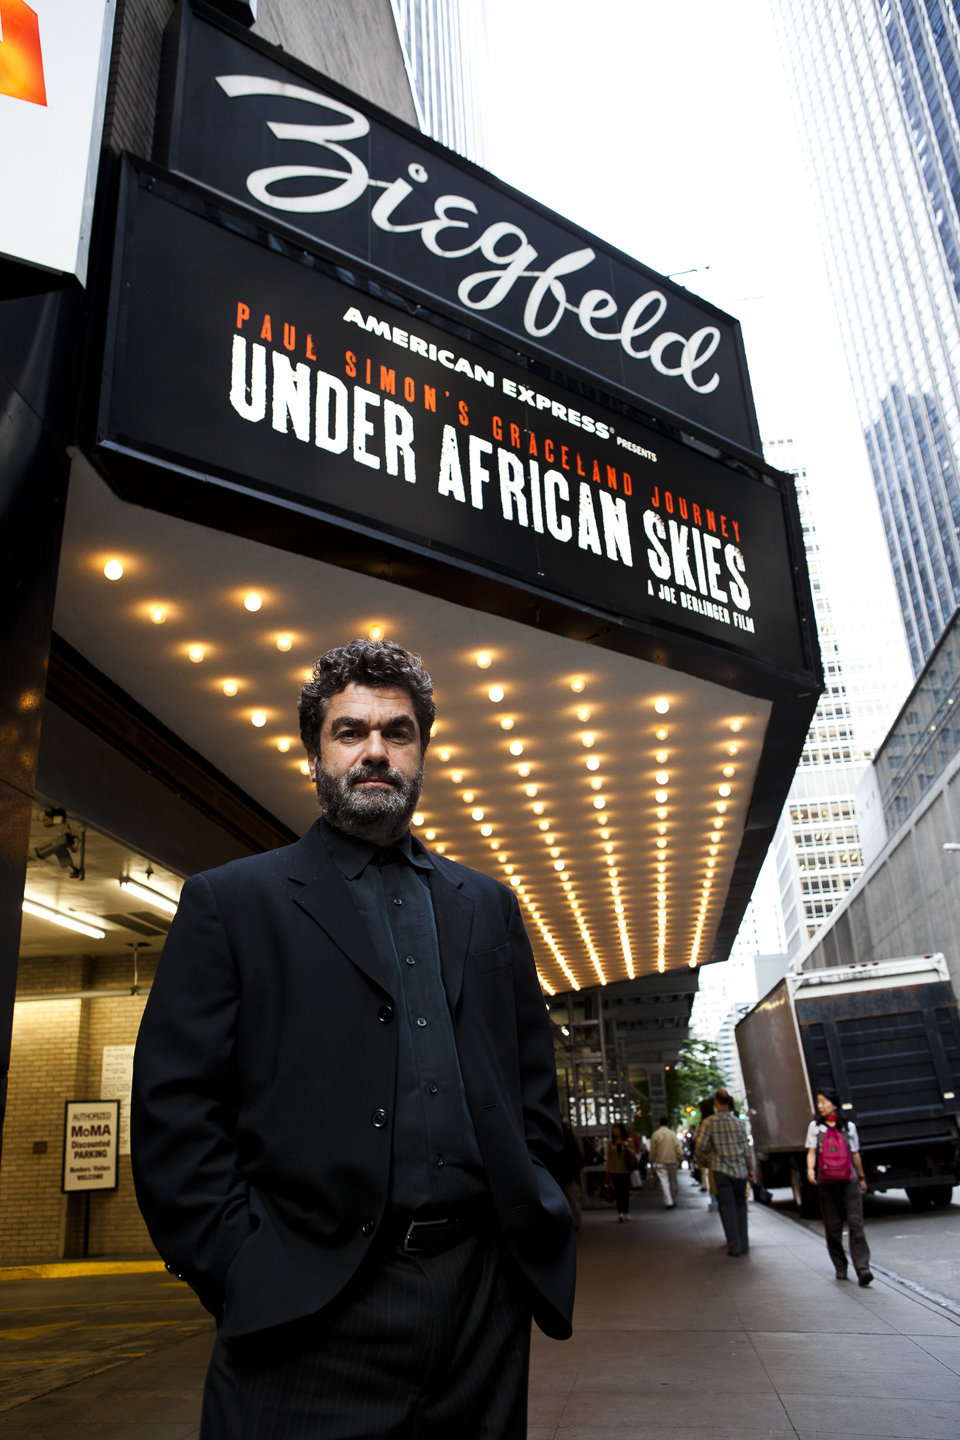 Joe Berlinger attends the New York premiere of his documentary feature UNDER AFRICAN SKIES